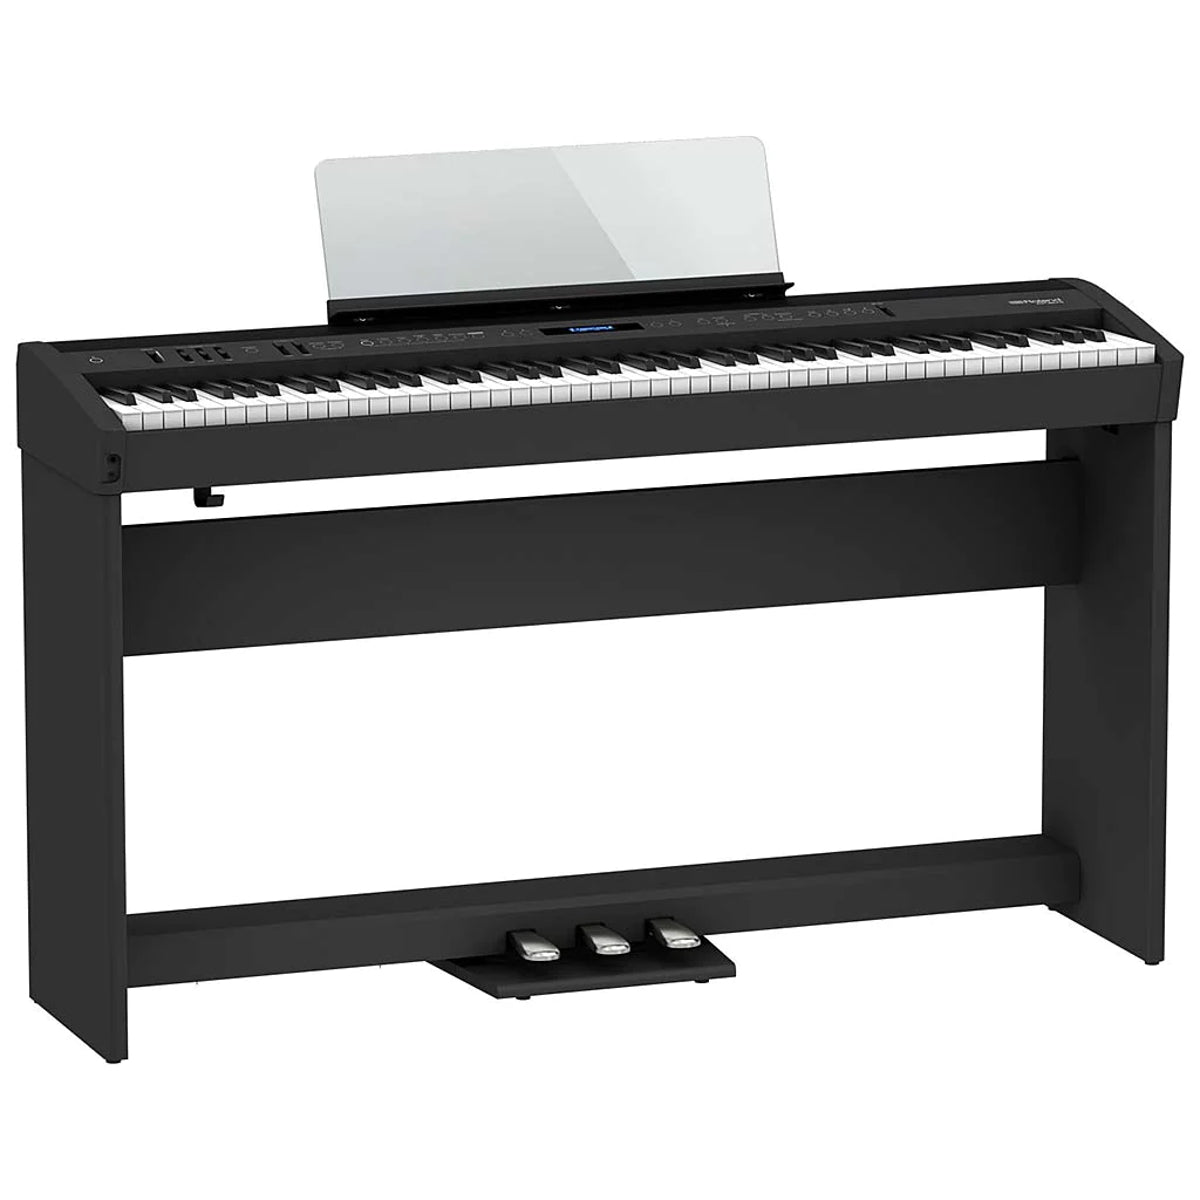 Roland FP-60X 88 Keys PHA-4 Standard Digital Piano with Bluetooth (Black) | Musical Instruments | Musical Instruments, Musical Instruments. Musical Instruments: Digital Piano, Musical Instruments. Musical Instruments: Piano & Keyboard | Roland